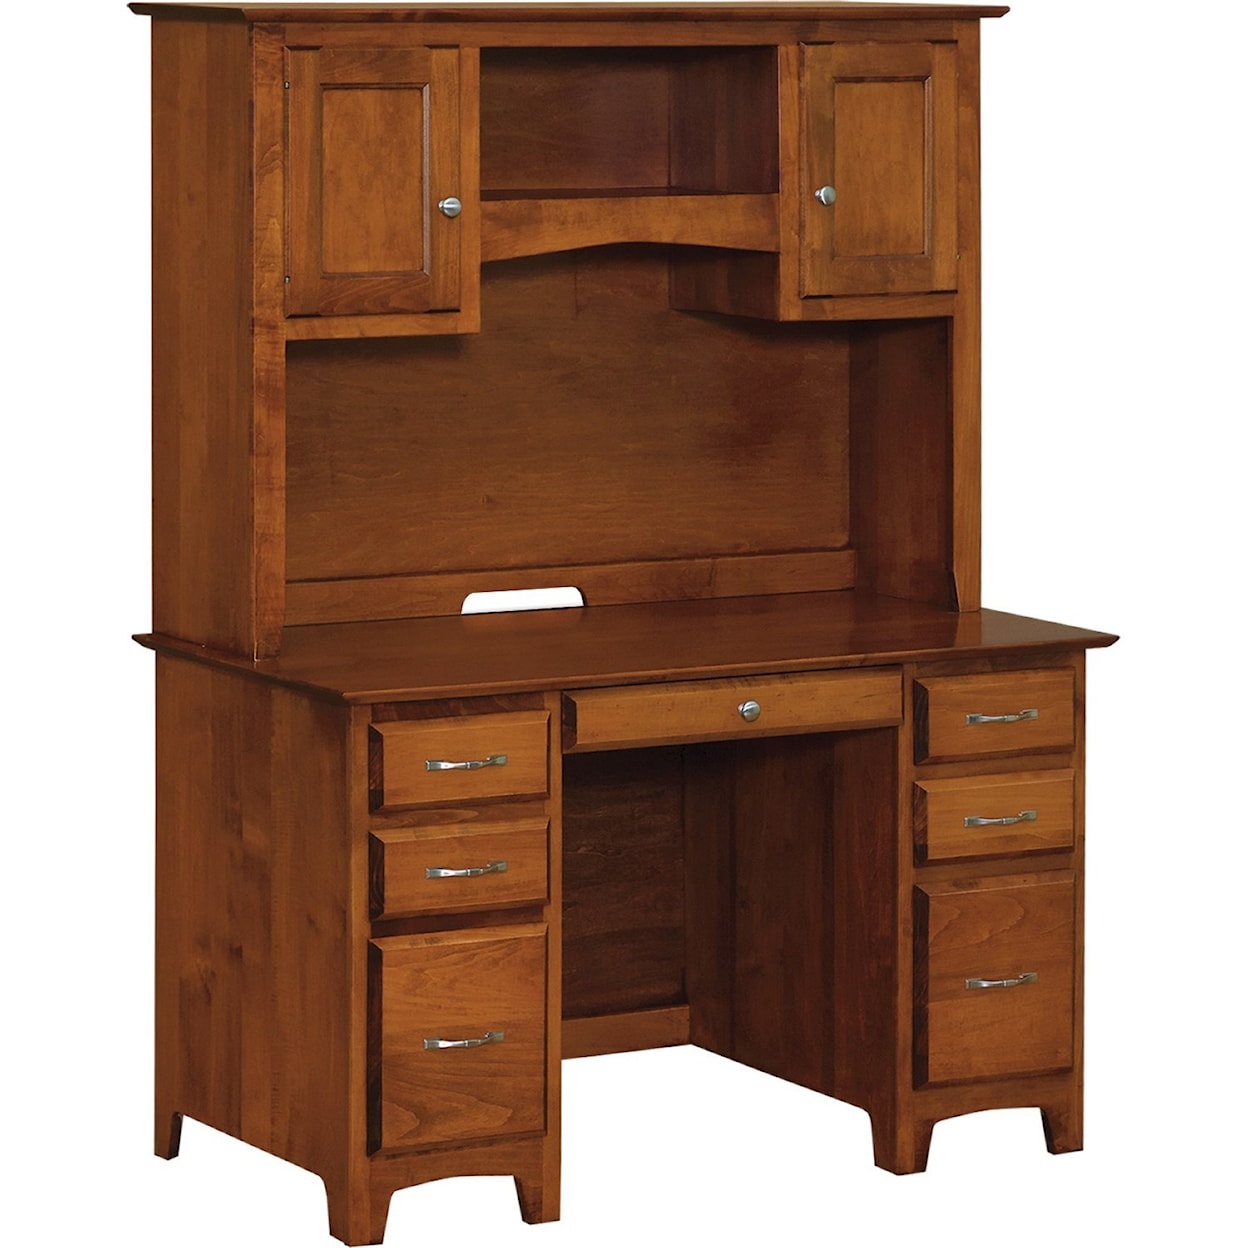 Maple Hill Woodworking Linwood 50" Executive Desk